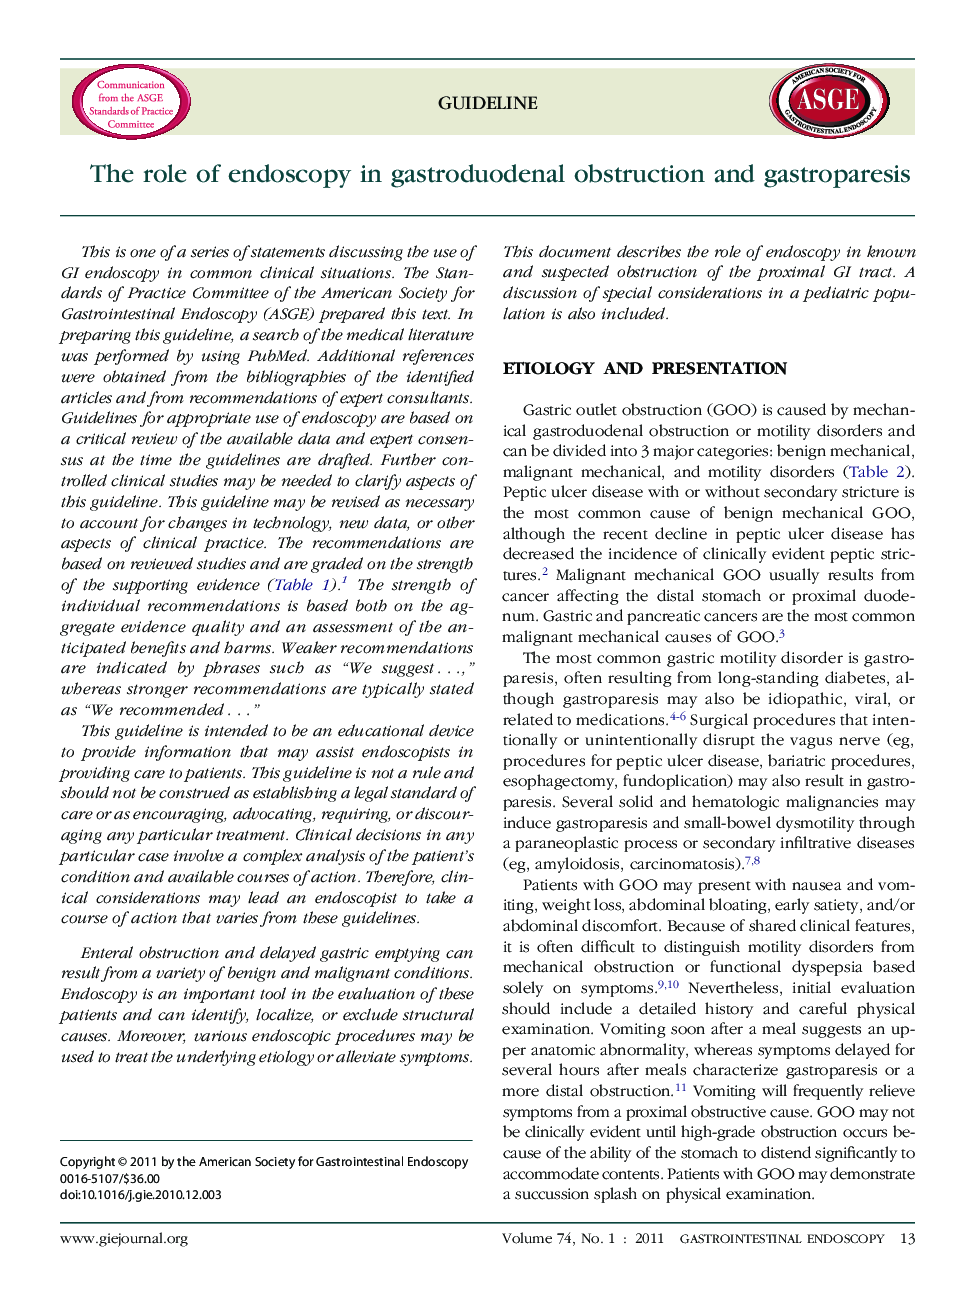 The role of endoscopy in gastroduodenal obstruction and gastroparesis